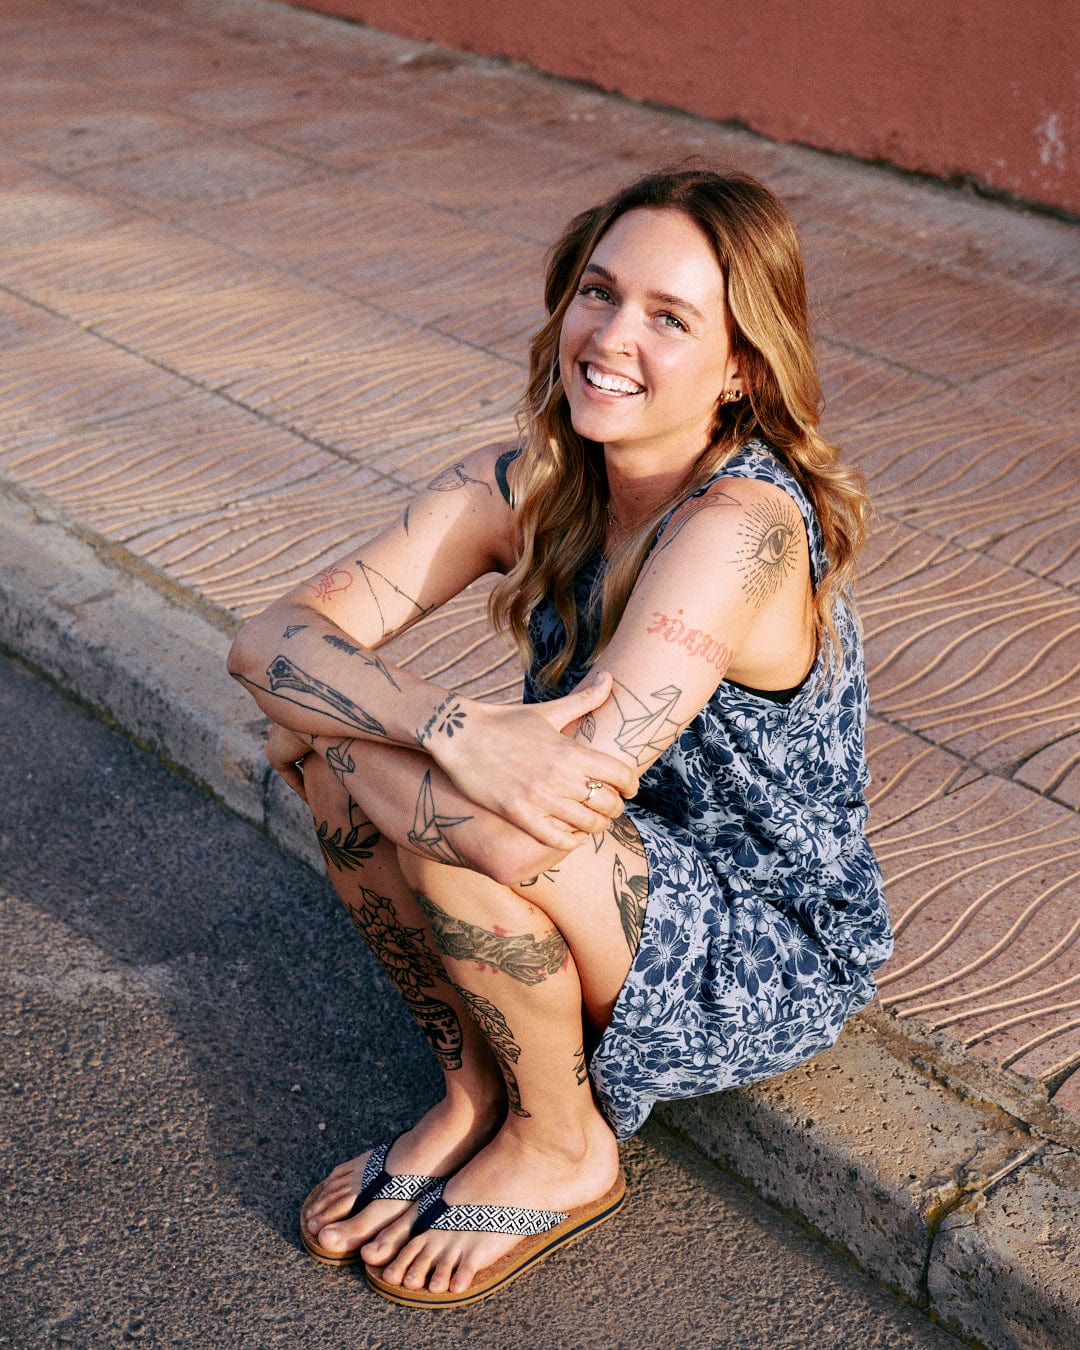 A young woman with tattoos sits smiling on a sidewalk, wearing a Hibiscus Bauhaus - Womens Midi Dress in Blue by Saltrock and flip-flops, during golden hour.